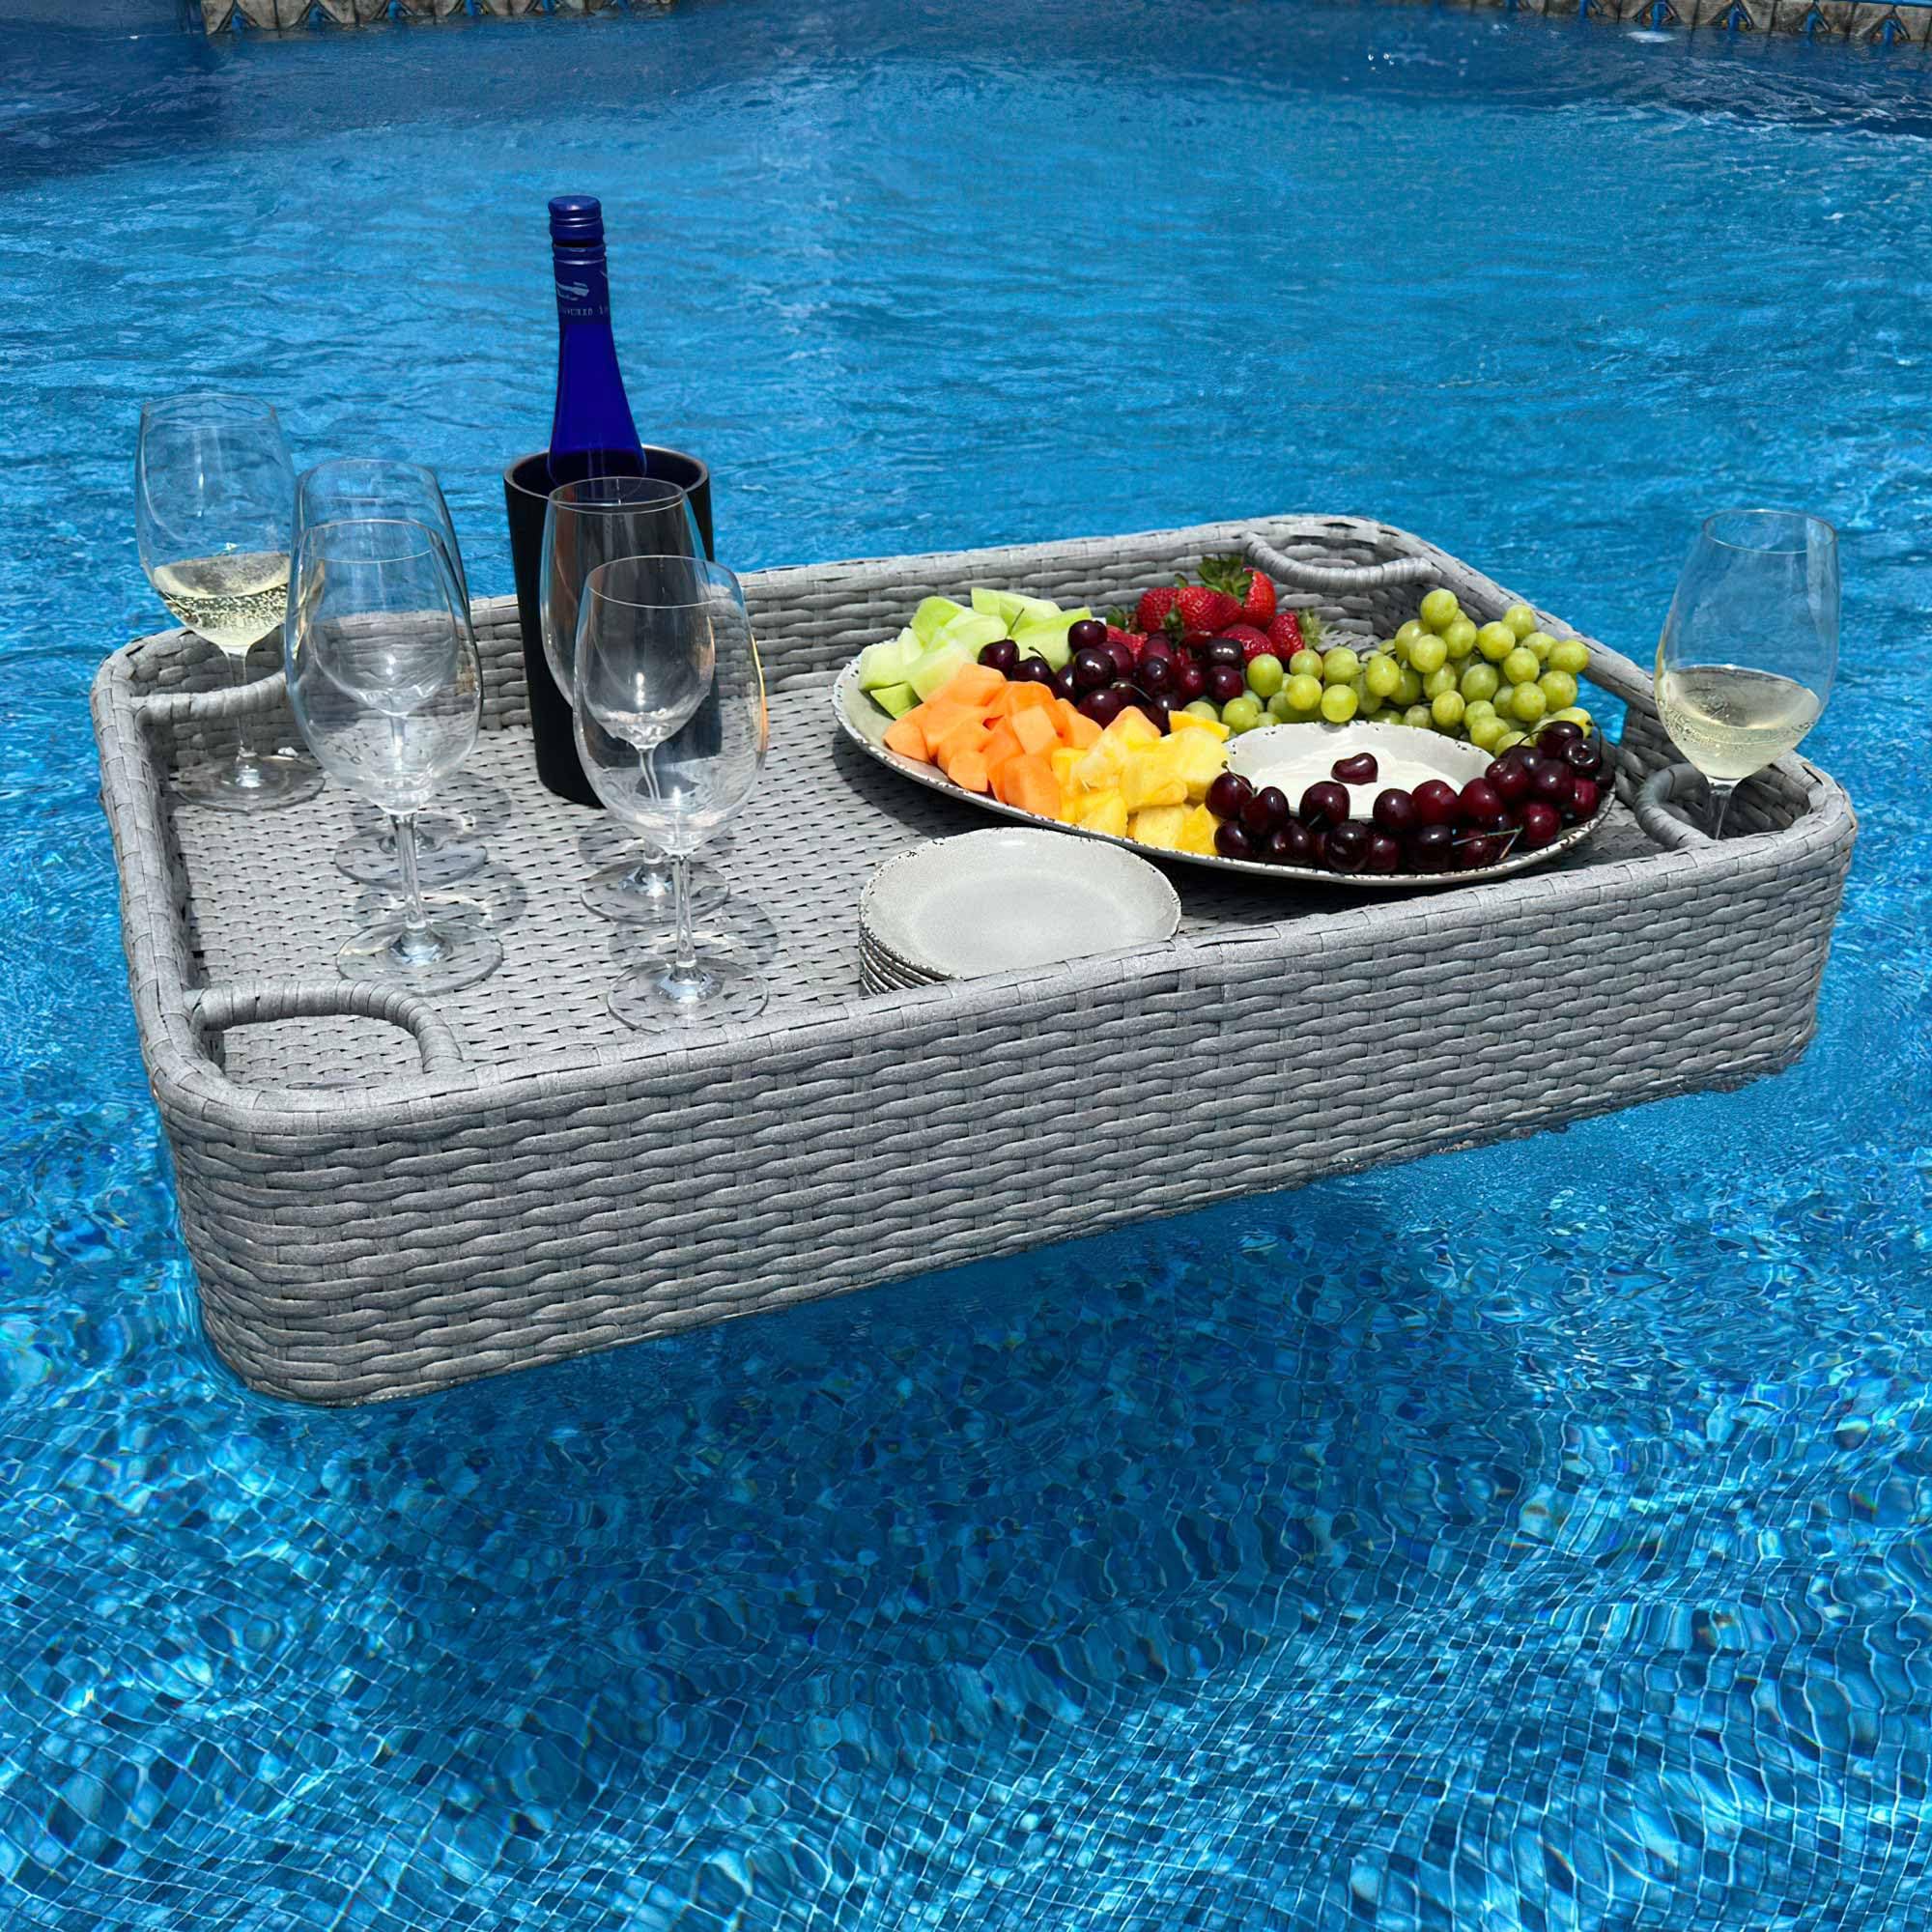 Sunjoy Wicker Floating Tray 36x24 in. Aluminum Frame Pool Tray - Swimming Floating Serving Tray for Drinks, Snacks, and Essentials - Fits Most Pool Sizes - Perfect for Pool Parties and Relaxing, Grey